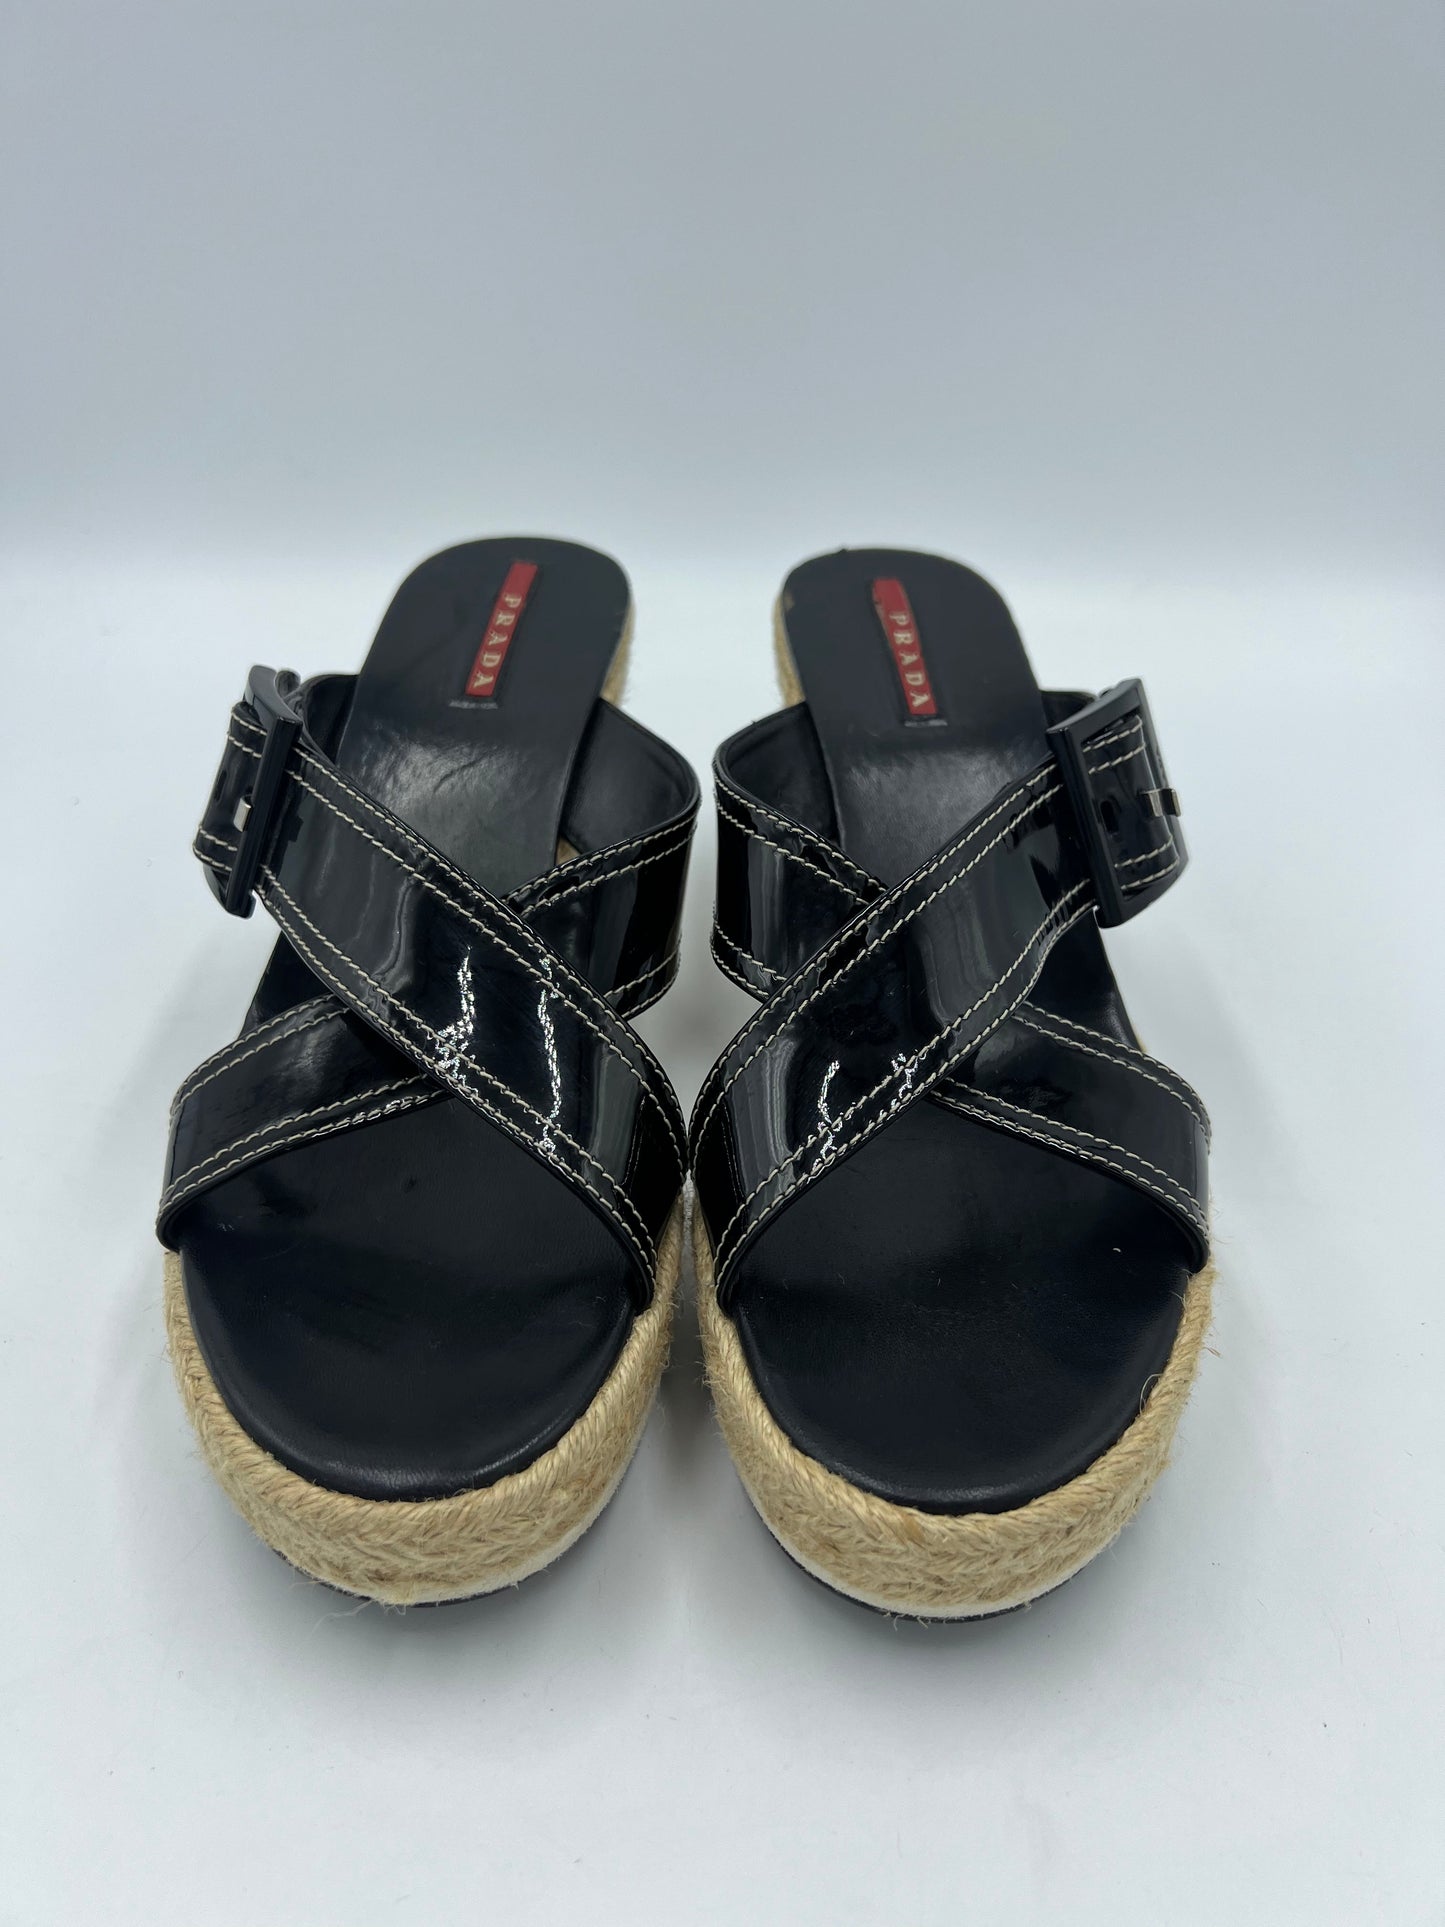 Prada Crossover Leather Wedge Sandals  Size: 8/38